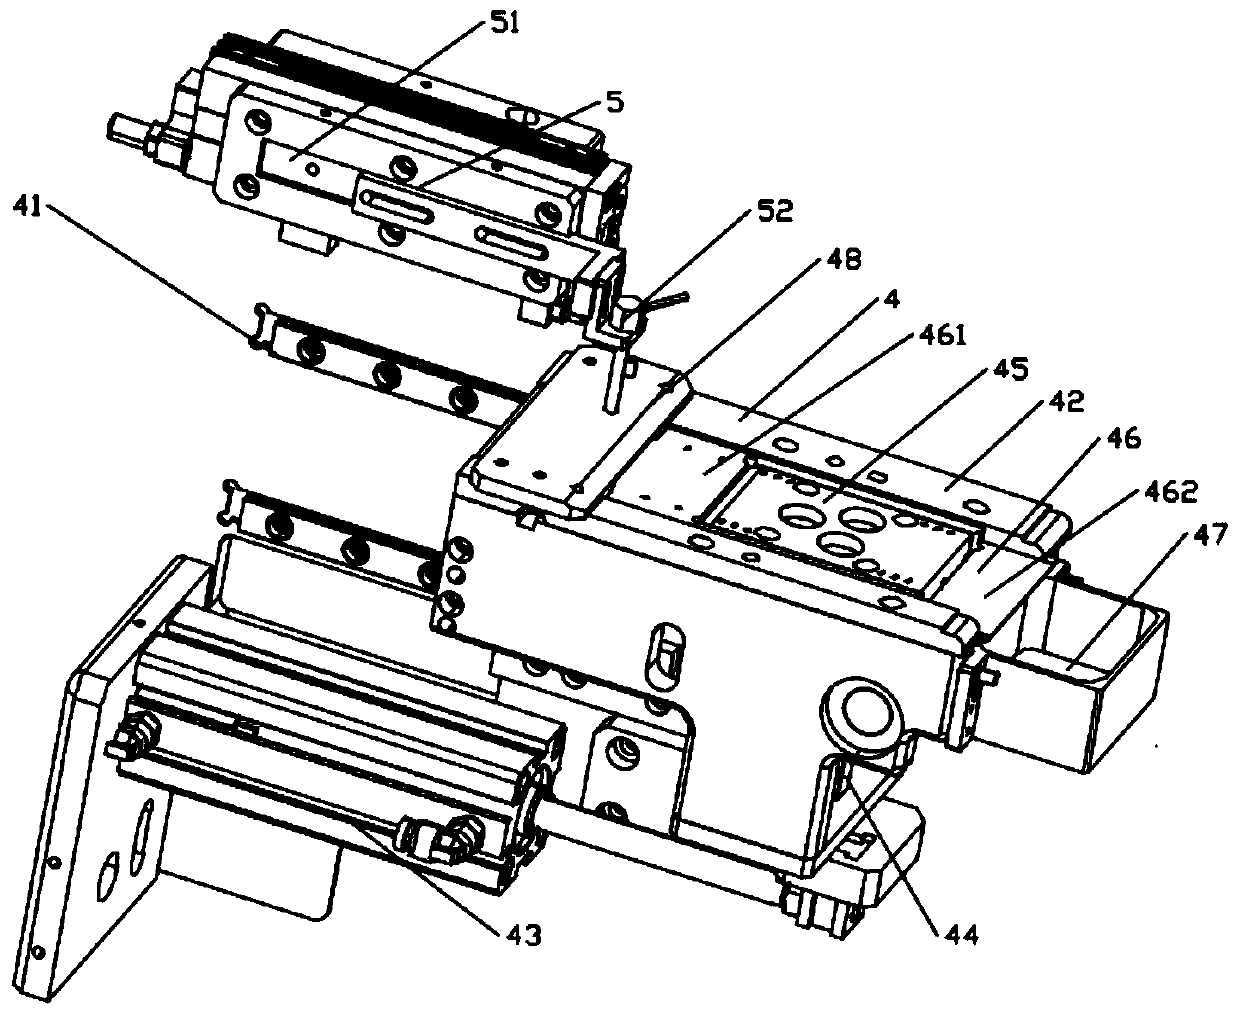 Label feeder with stripping assembly capable of moving to achieve avoidance